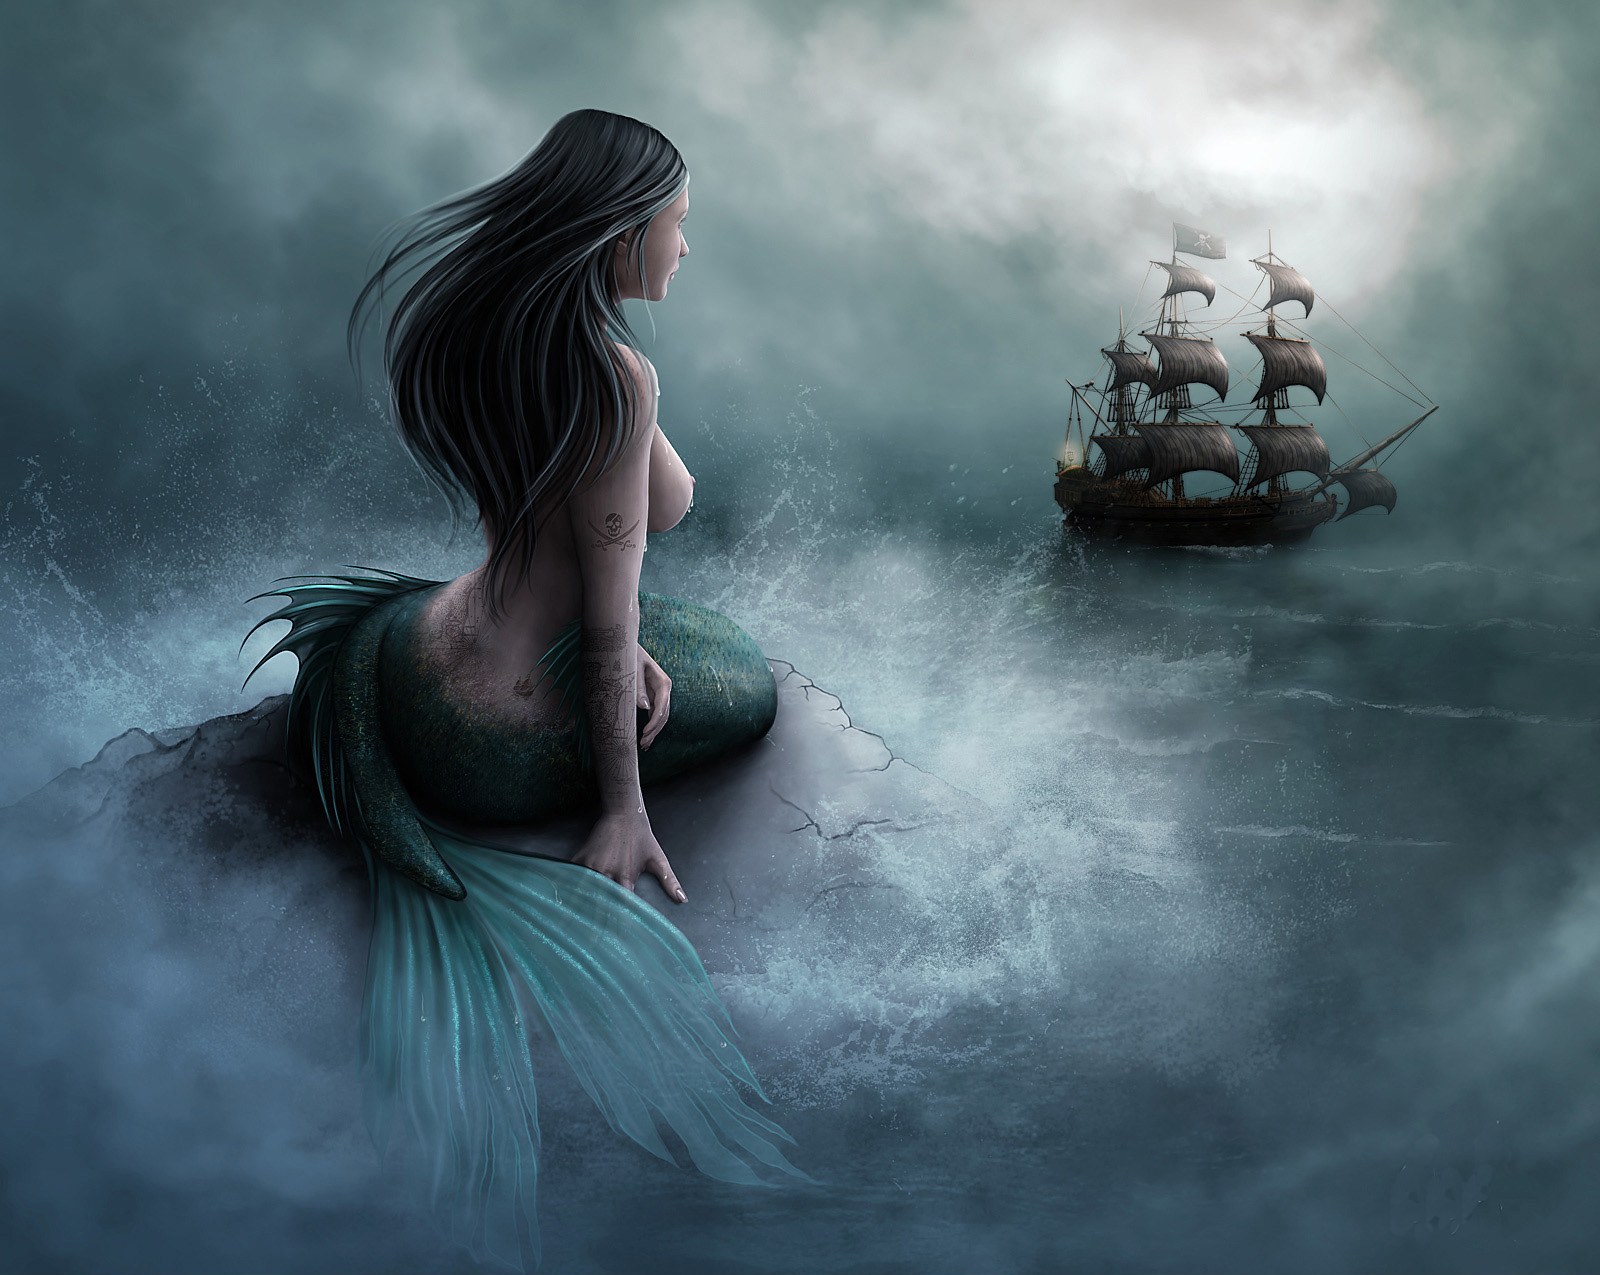 Unknown Artist Mermaid and pirate ship